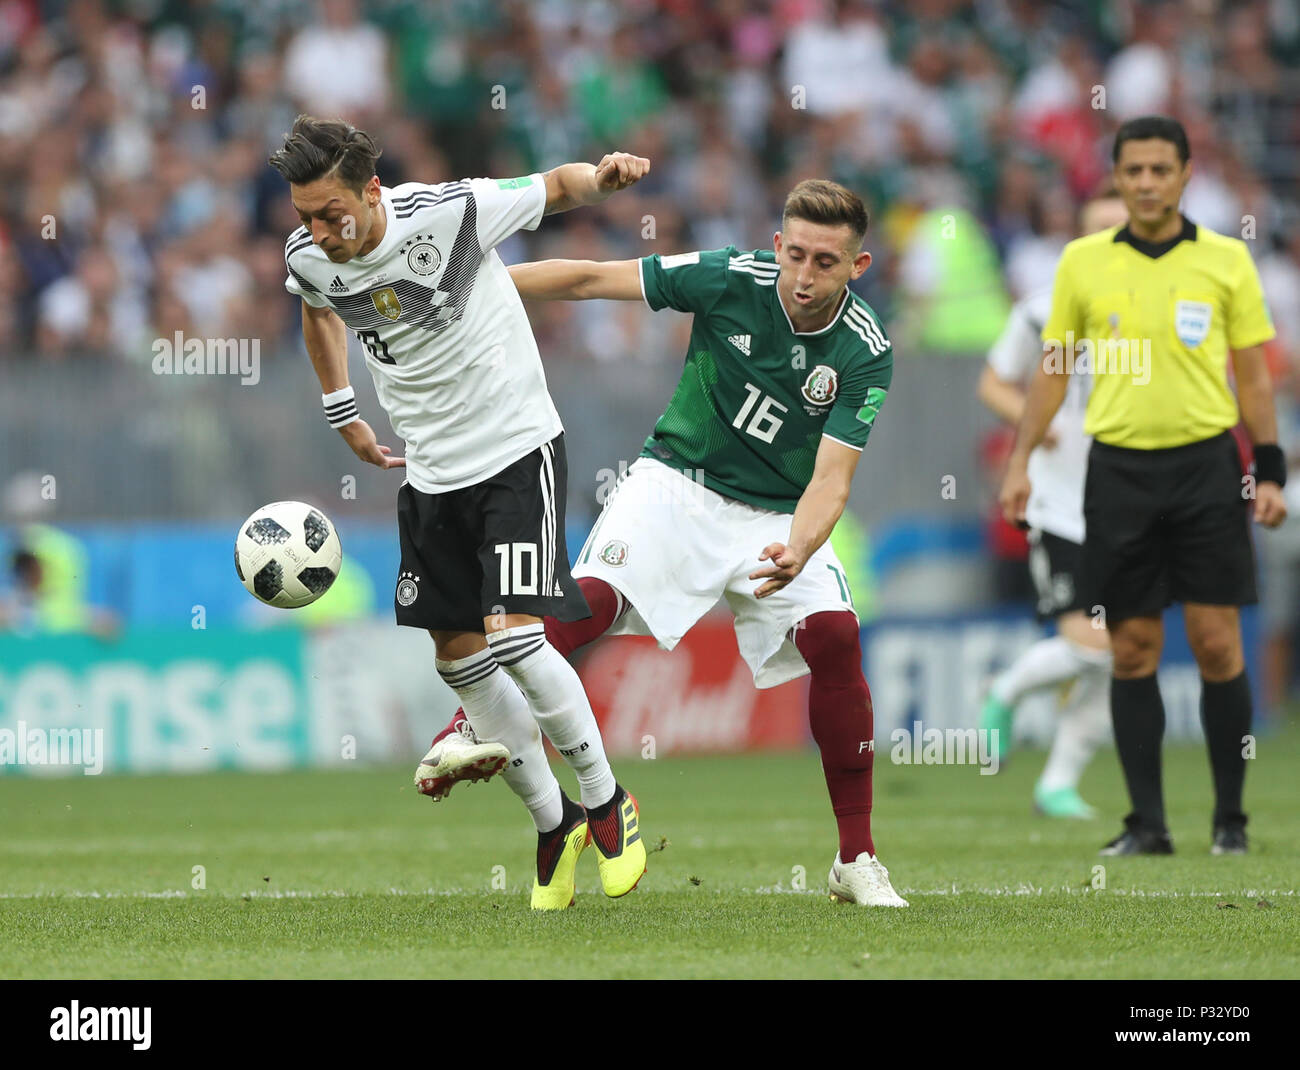 Moscow, Russia. 17th June, 2018. Mesut Oezil (L) of Germany vies with Hector Herrera of Mexico during a group F match between Germany and Mexico at the 2018 FIFA World Cup in Moscow, Russia, June 17, 2018. Credit: Xu Zijian/Xinhua/Alamy Live News Stock Photo